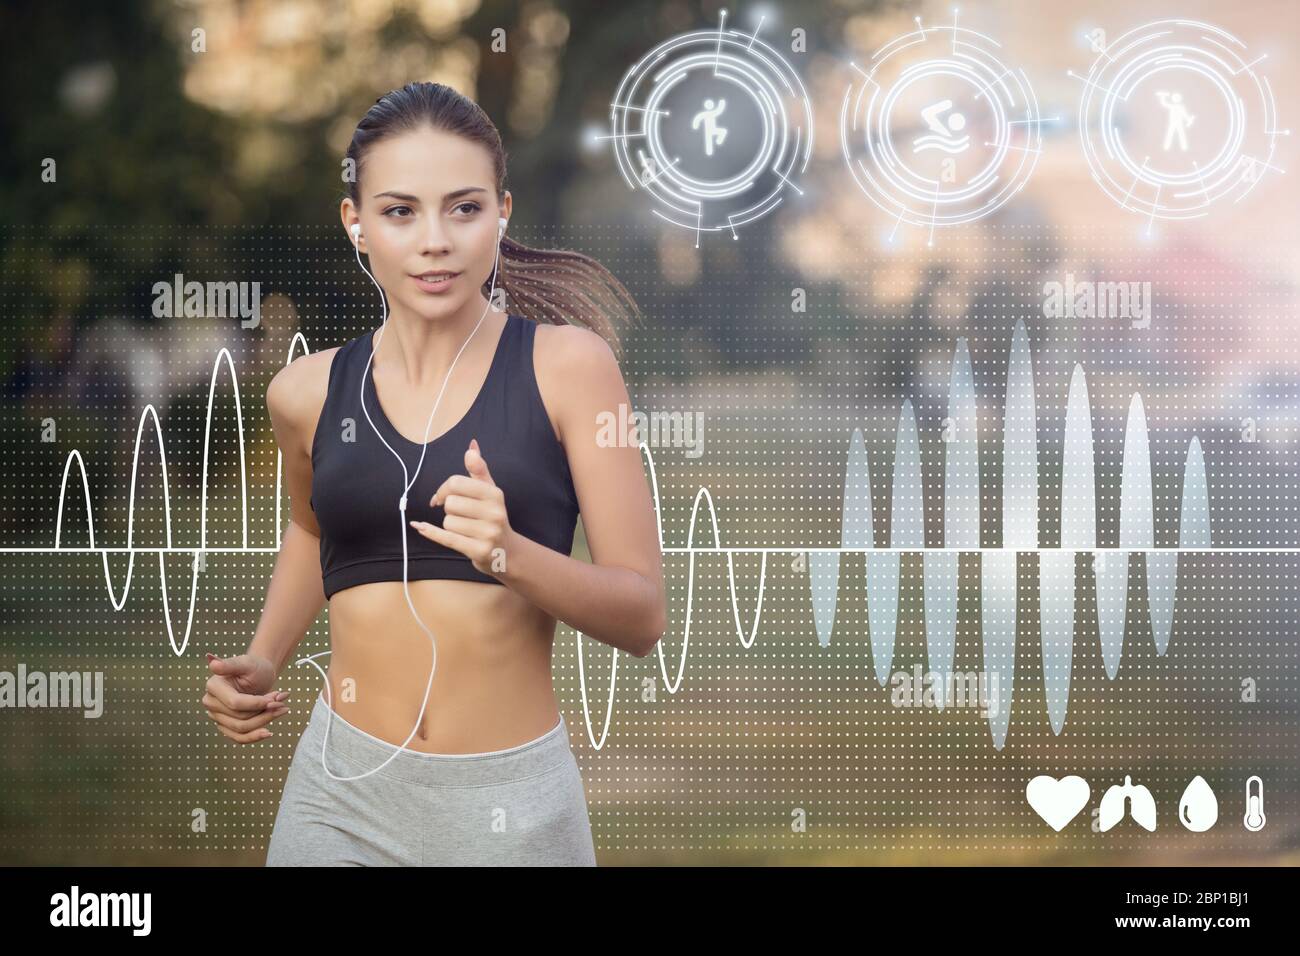 Young jogger with earphones exercising and listening to music outdoors. Collage with health info on virtual screen Stock Photo